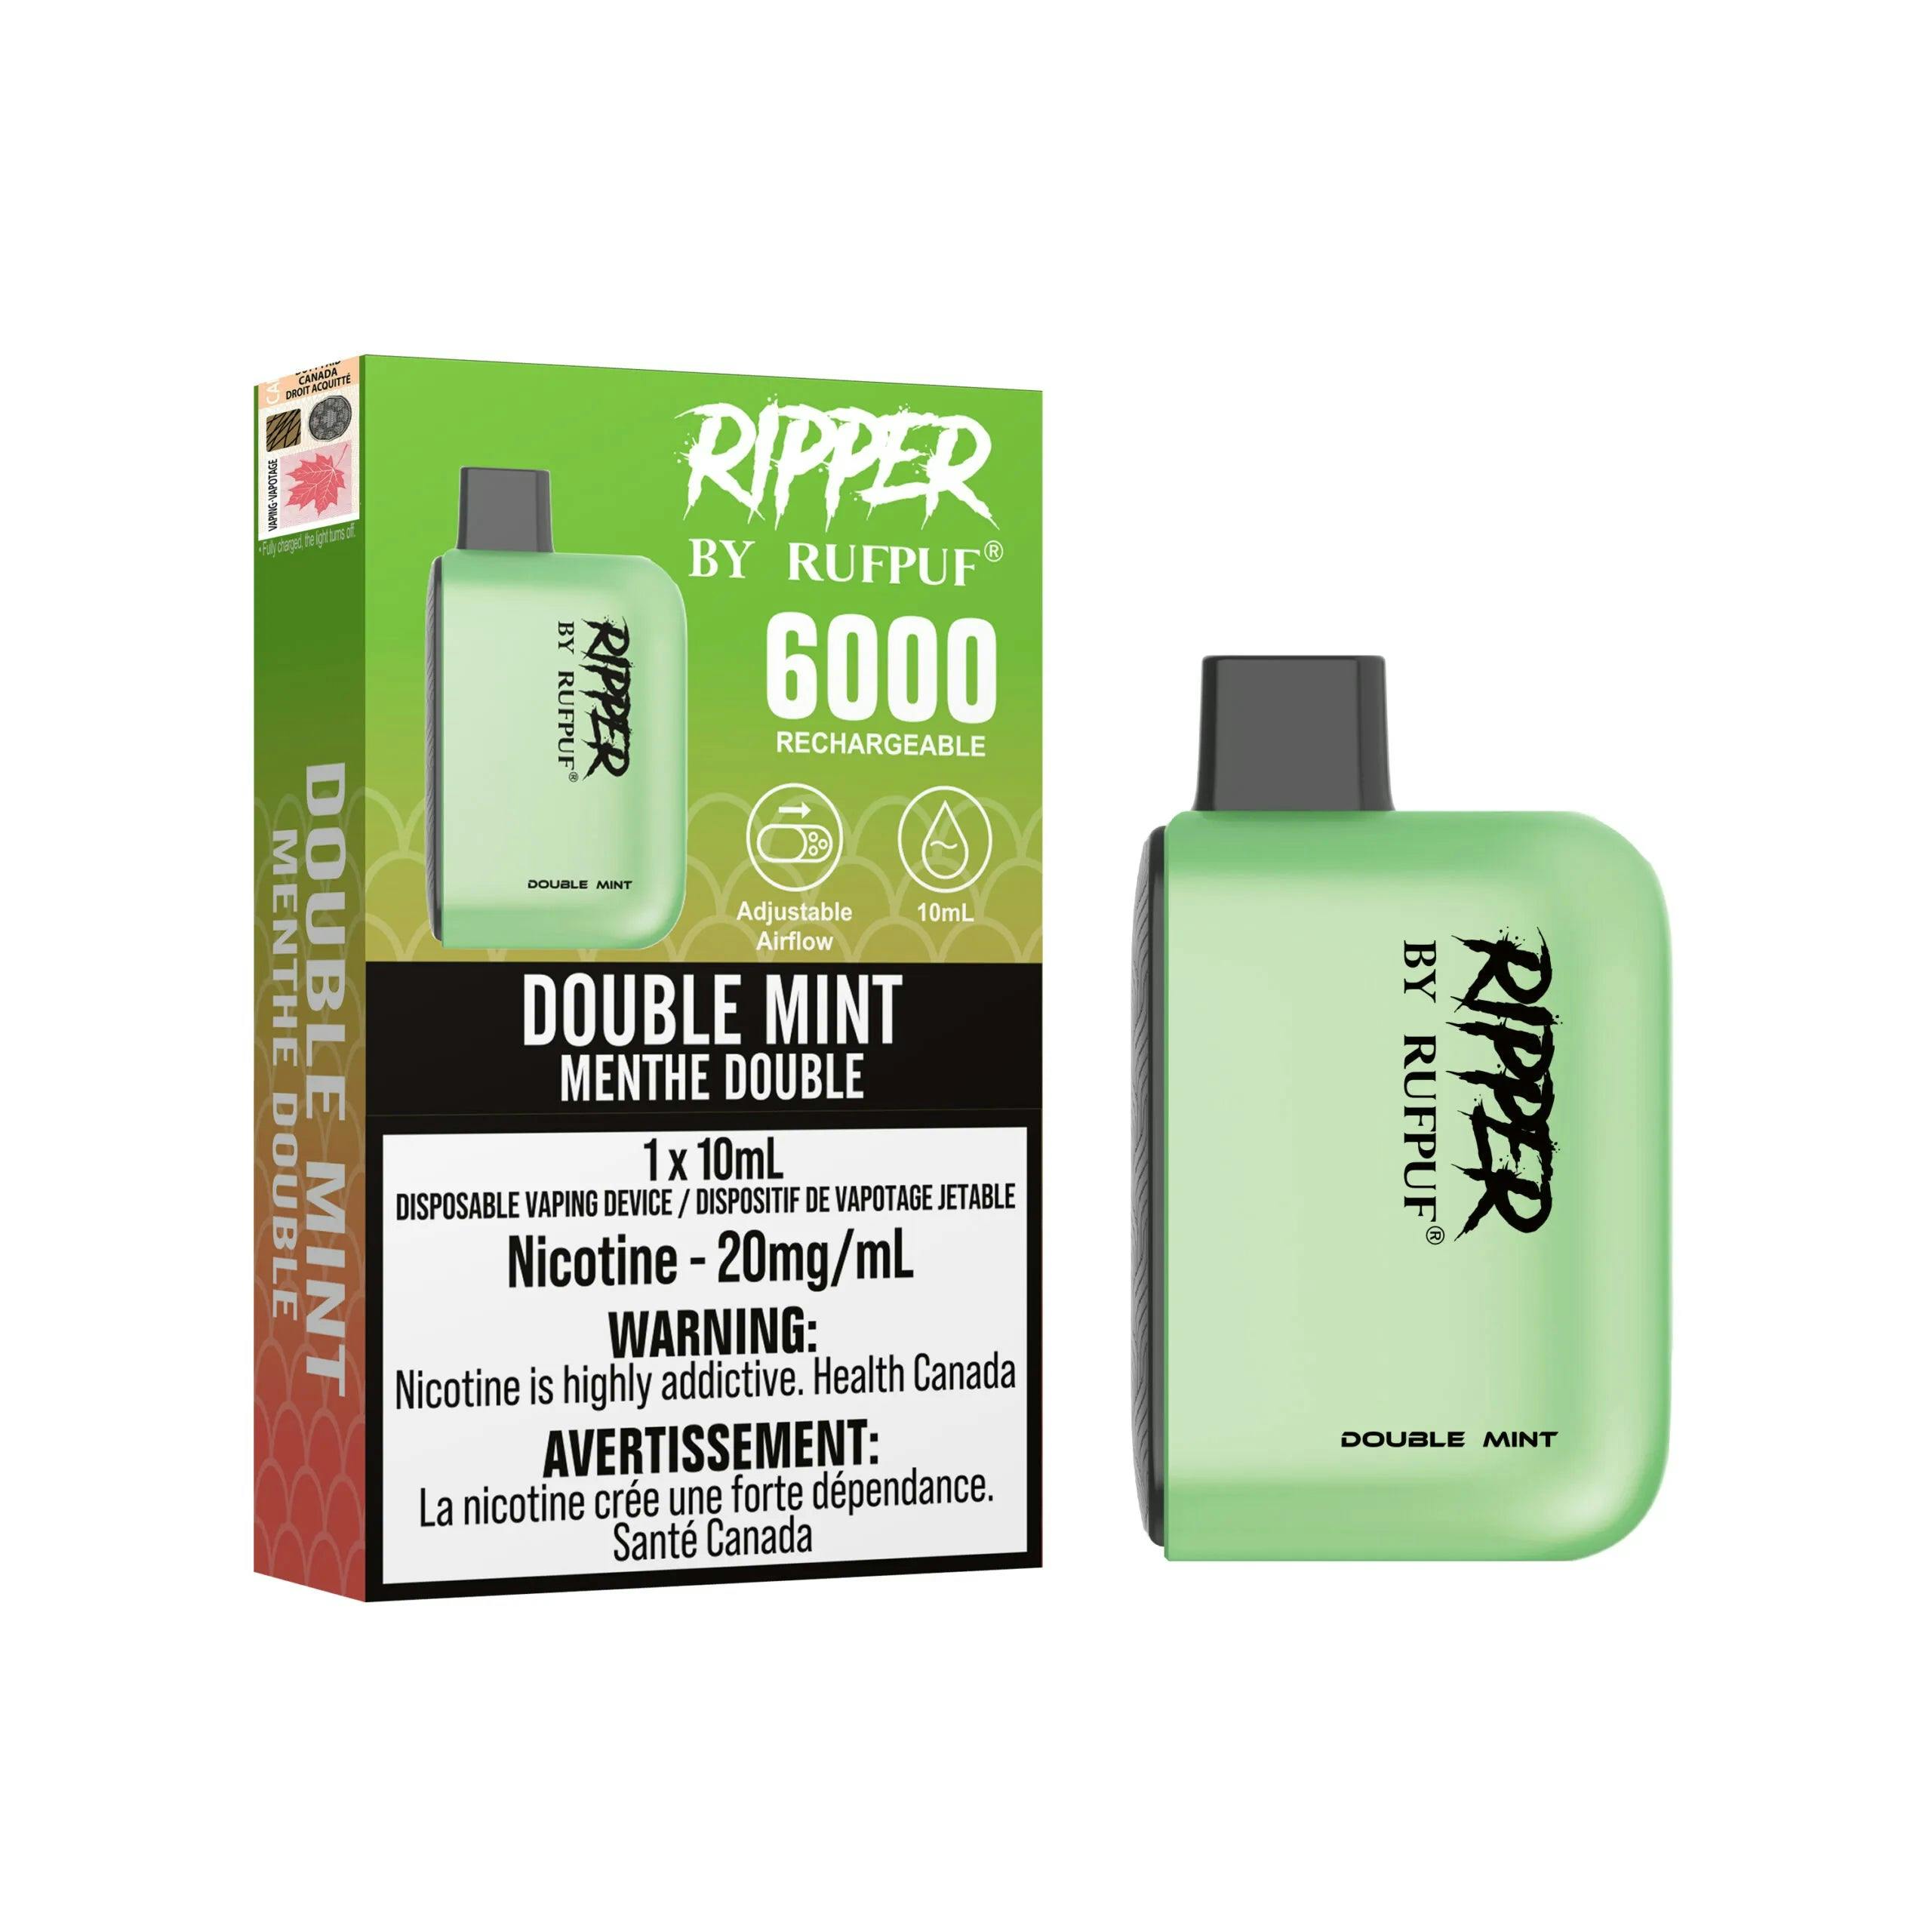 Rufpuf Ripper 20mg 6000 Puffs 10CT- Excise Version-undefined | For sale Jubilee Distributors